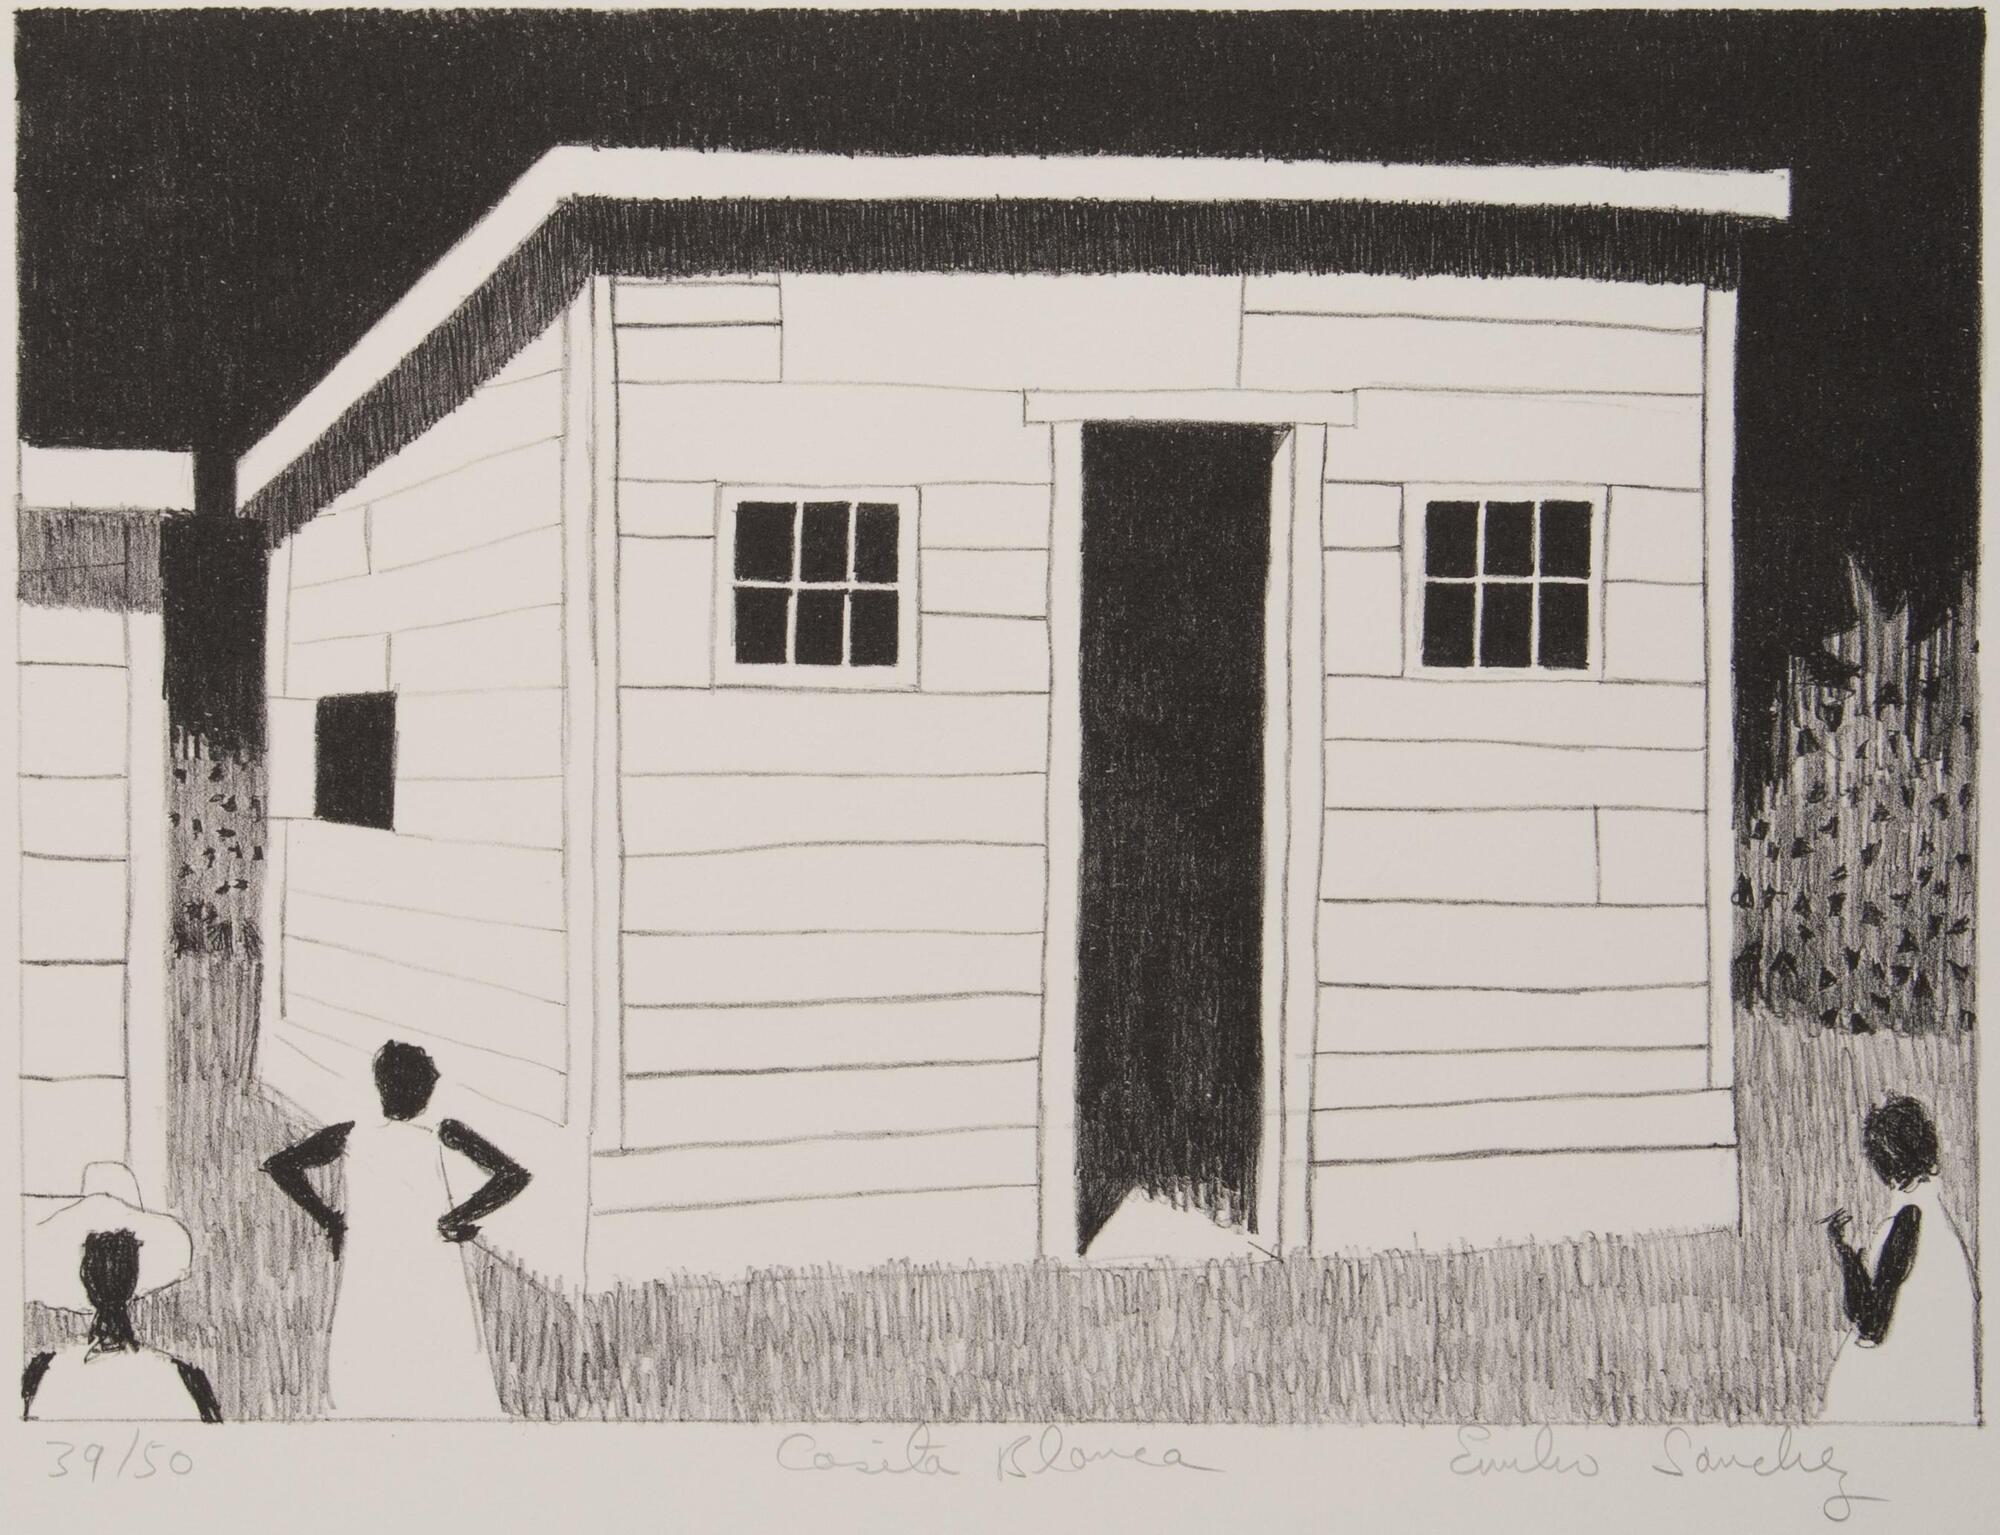 A black and white print of a shed in front of a field. Three people are standing around it.